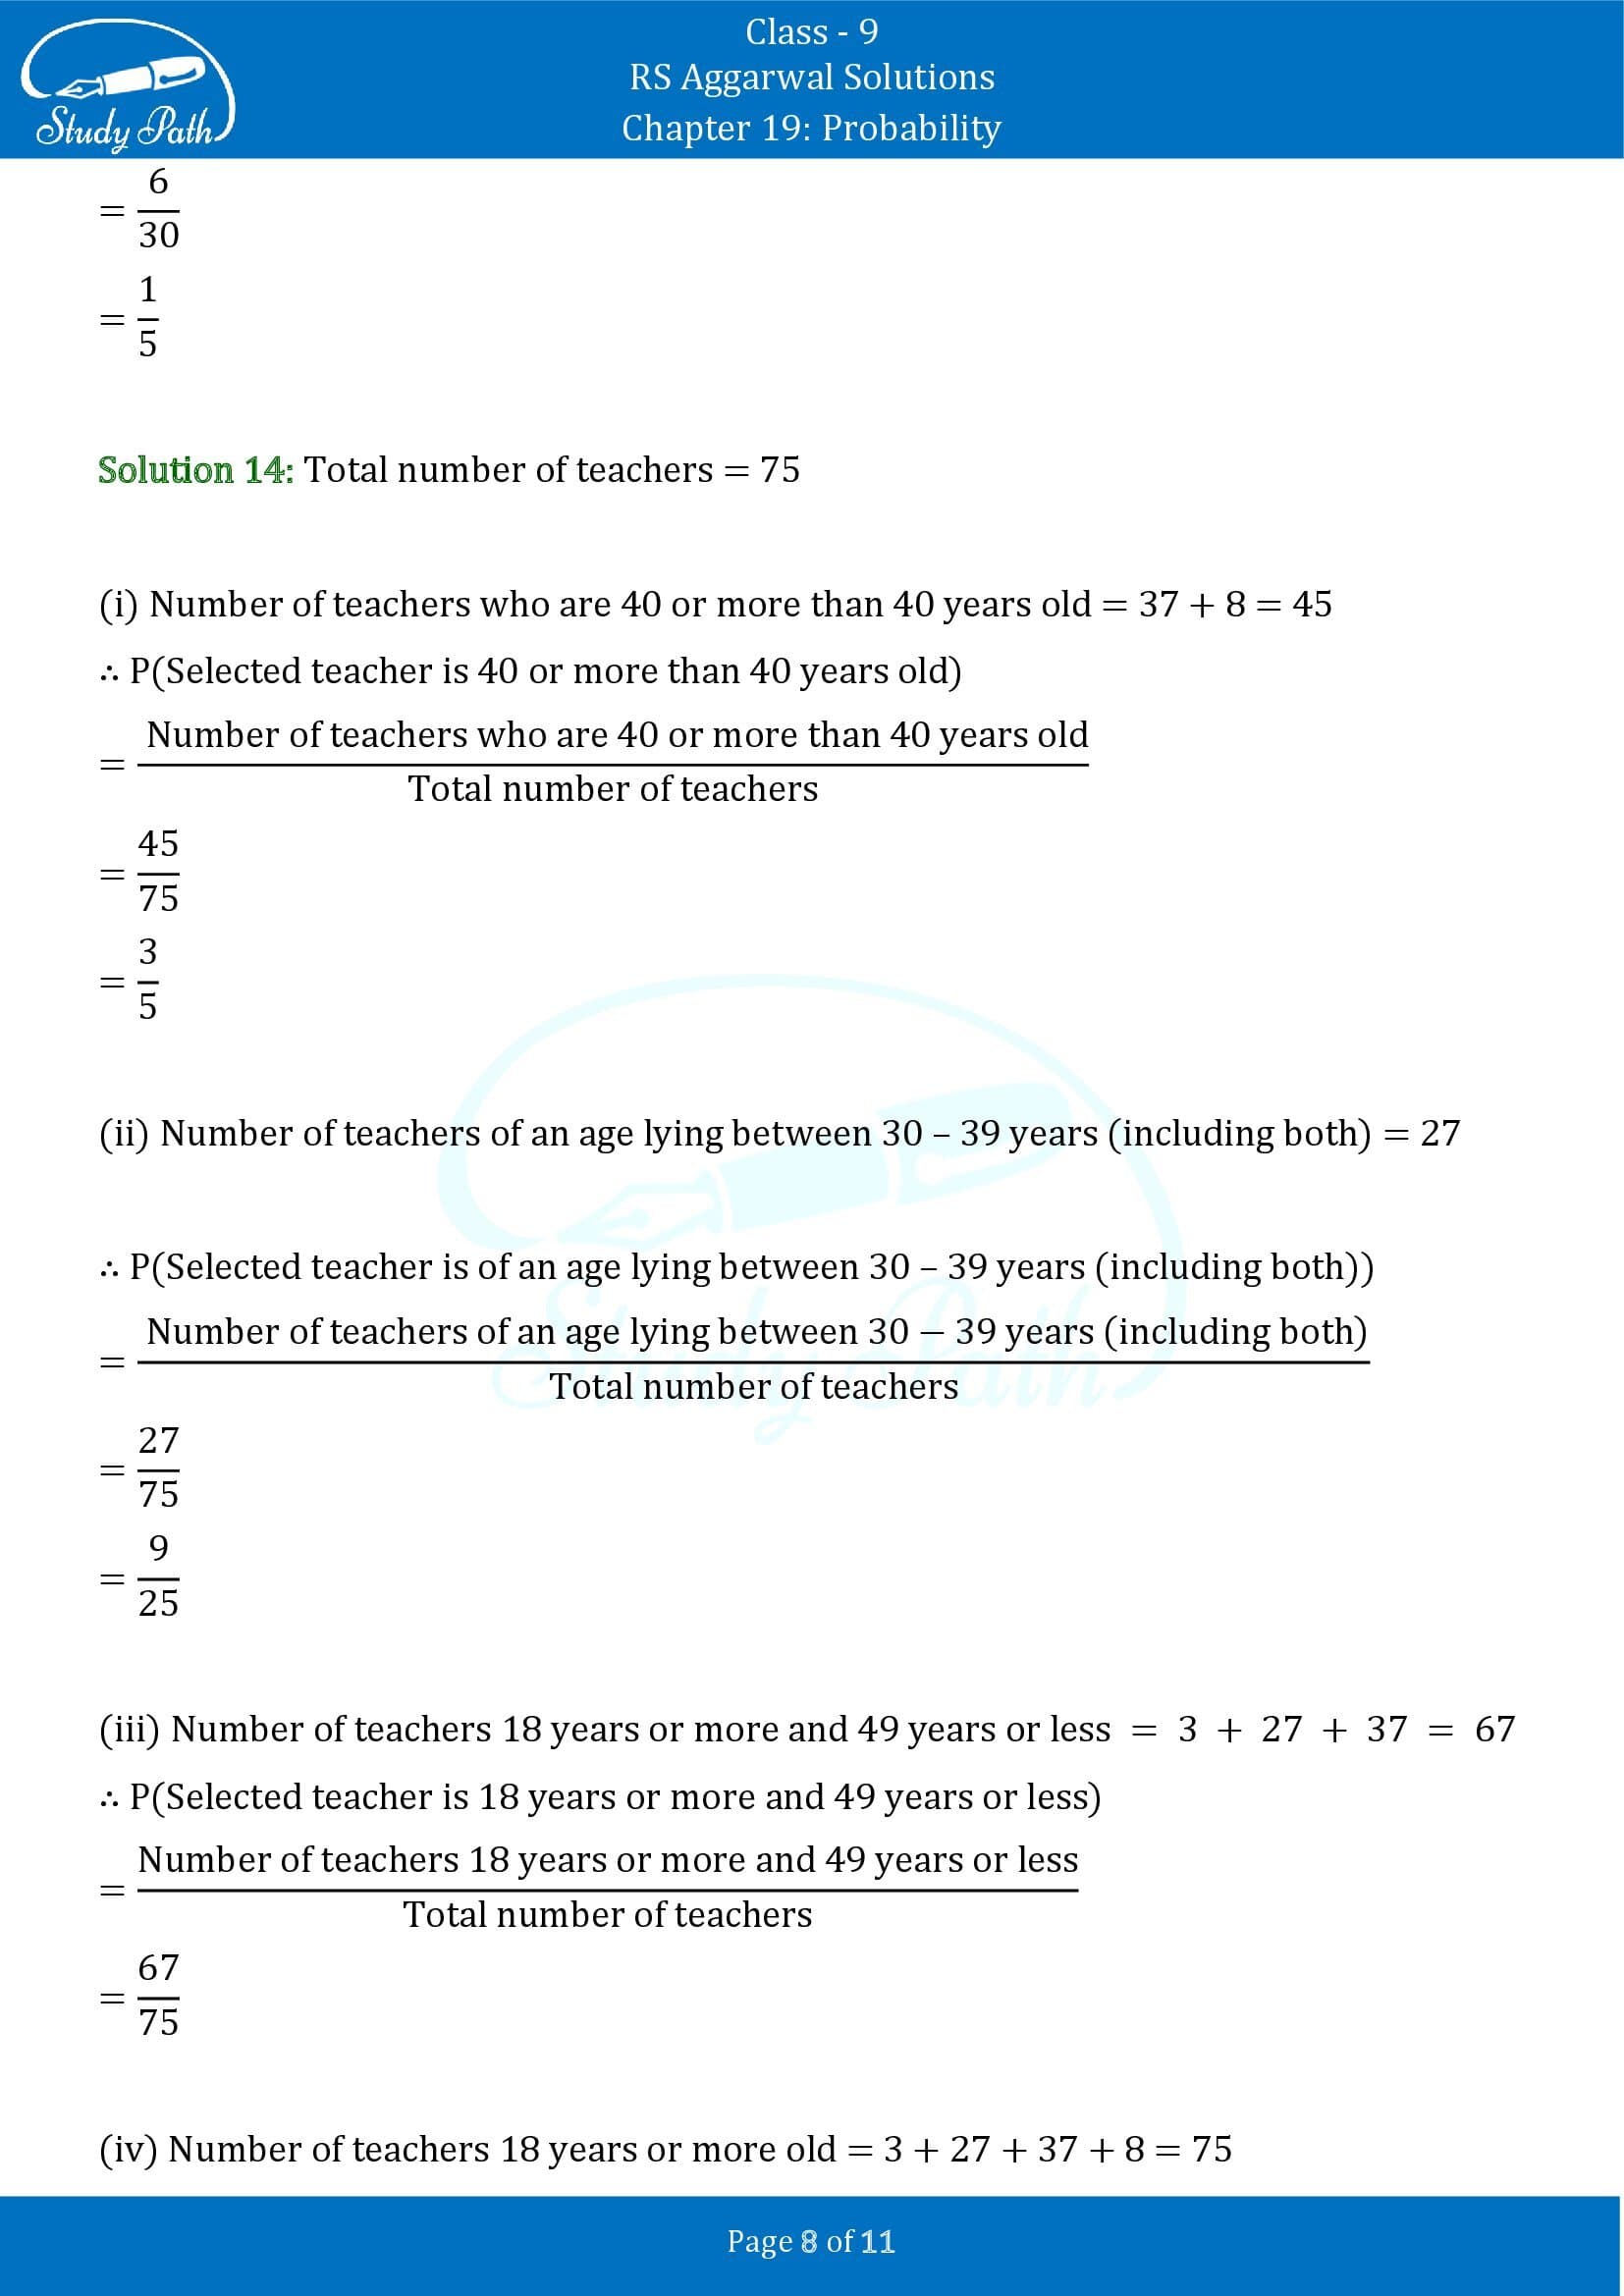 RS Aggarwal Solutions Class 9 Chapter 19 Probability Exercise 19 00008